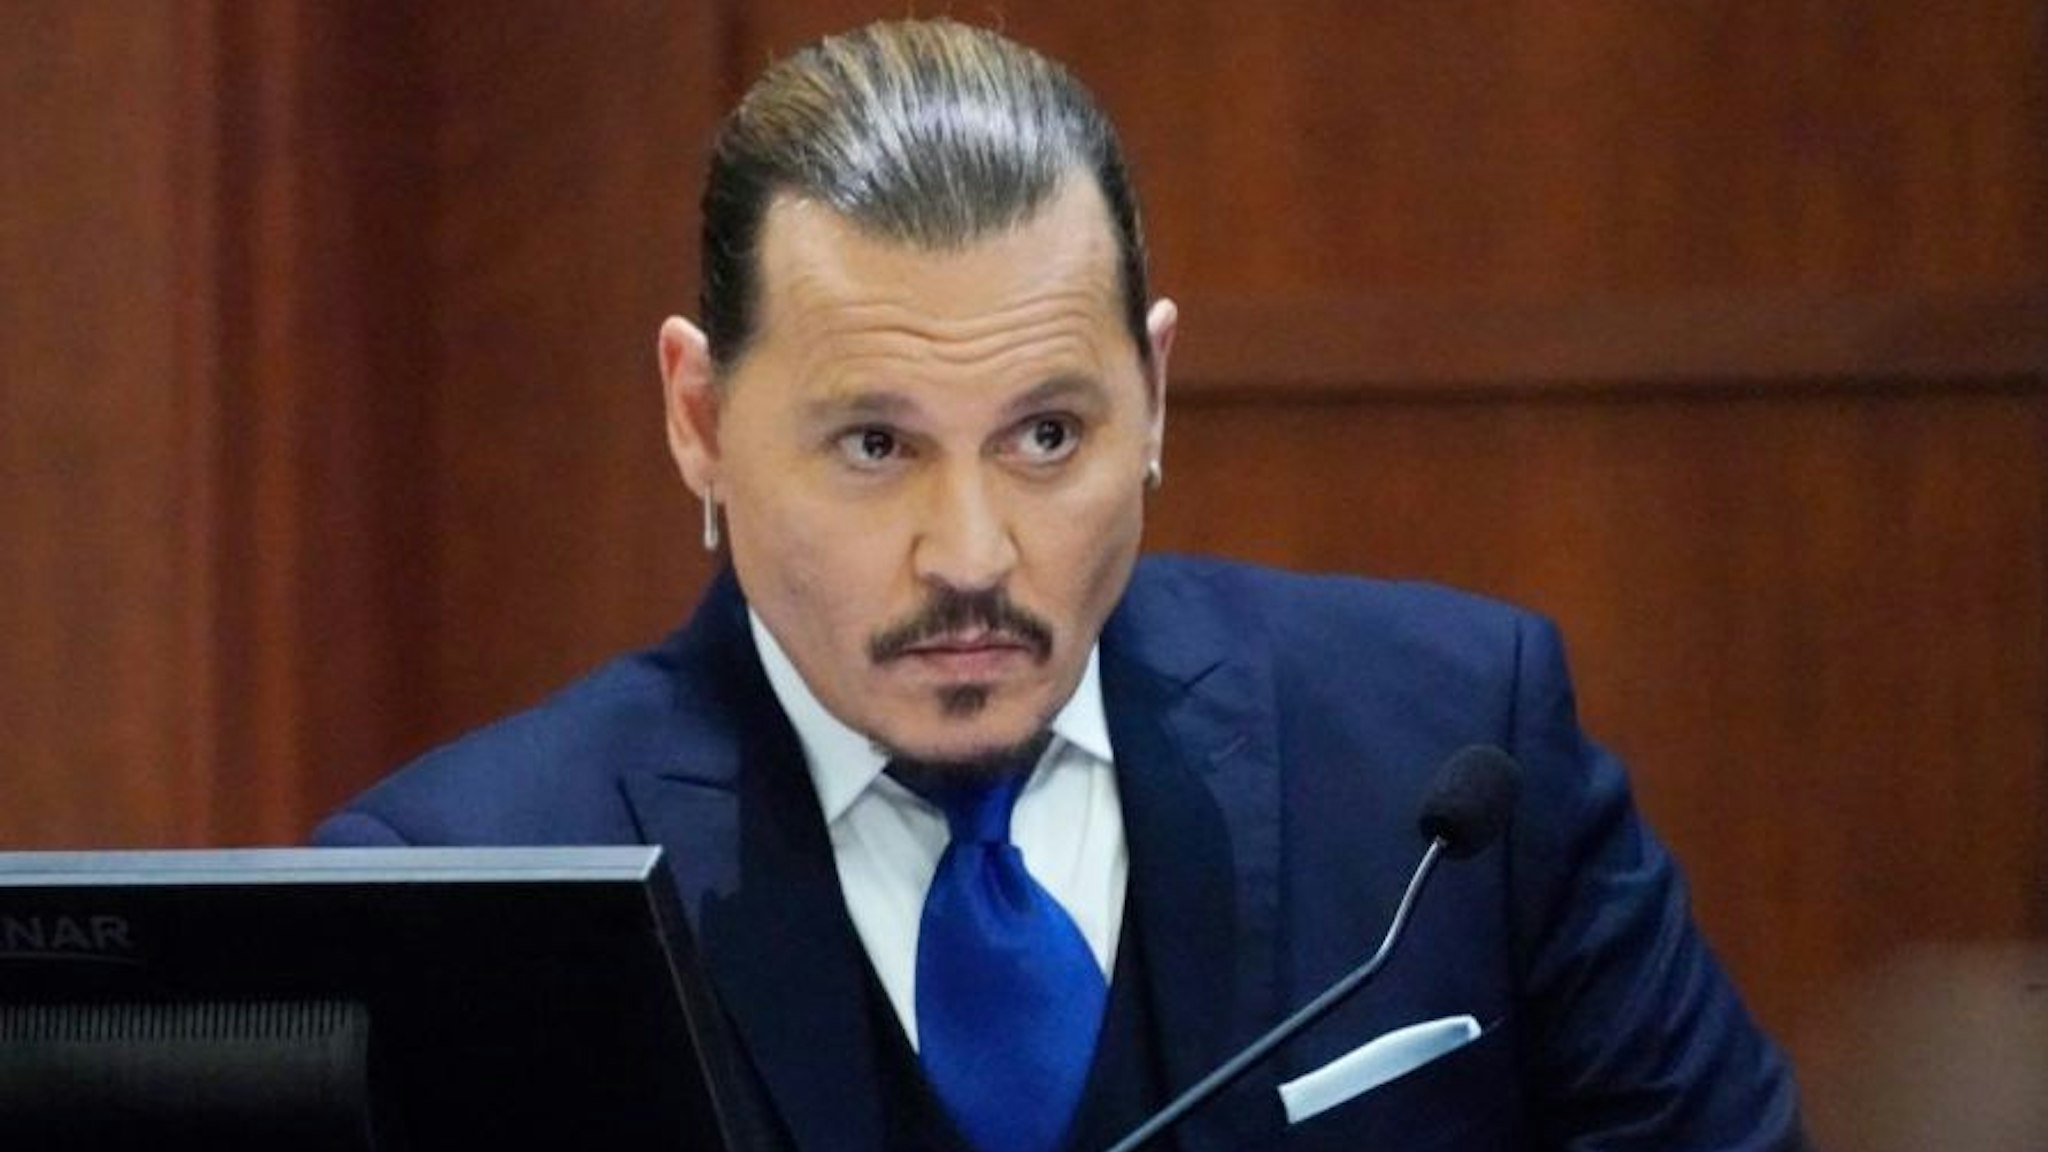 Actor Johnny Depp sits to testify in the courtroom at the Fairfax County Circuit Courthouse in Fairfax, Virginia, April 25, 2022.